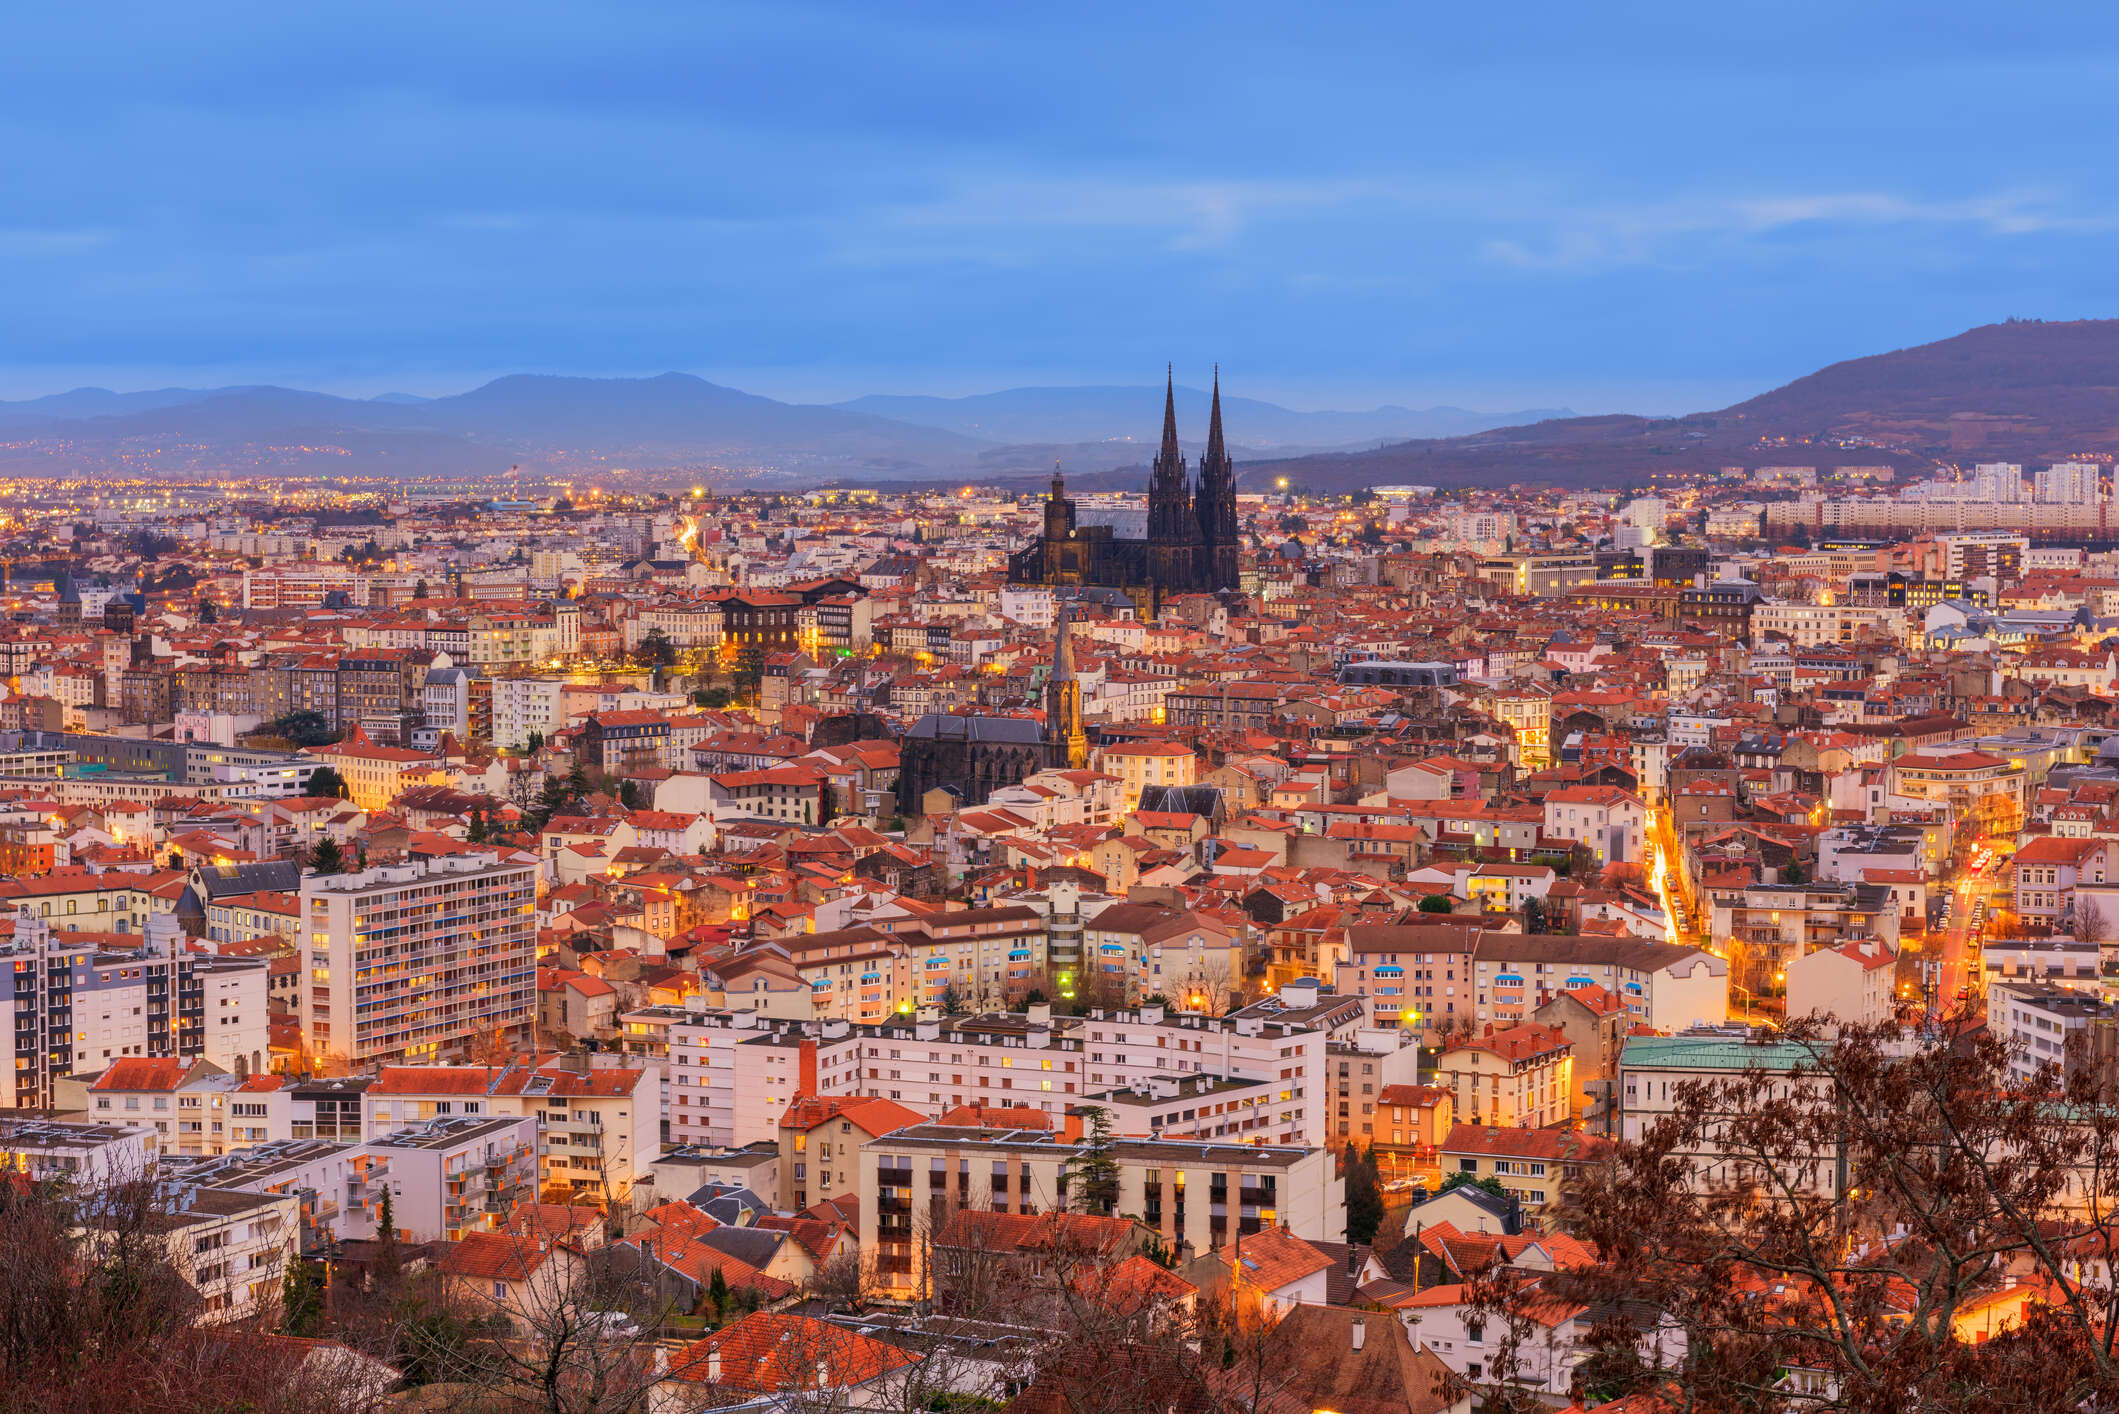 Skyline of Clermont-Ferrand, Auvergne, France at Dusk. Main focal point is the 13th Century Cathedral of Our Lady of the Assumption of Clermont-Ferrand, built entirely in black lava stone. Its twin spires are 96.1 metres tall.